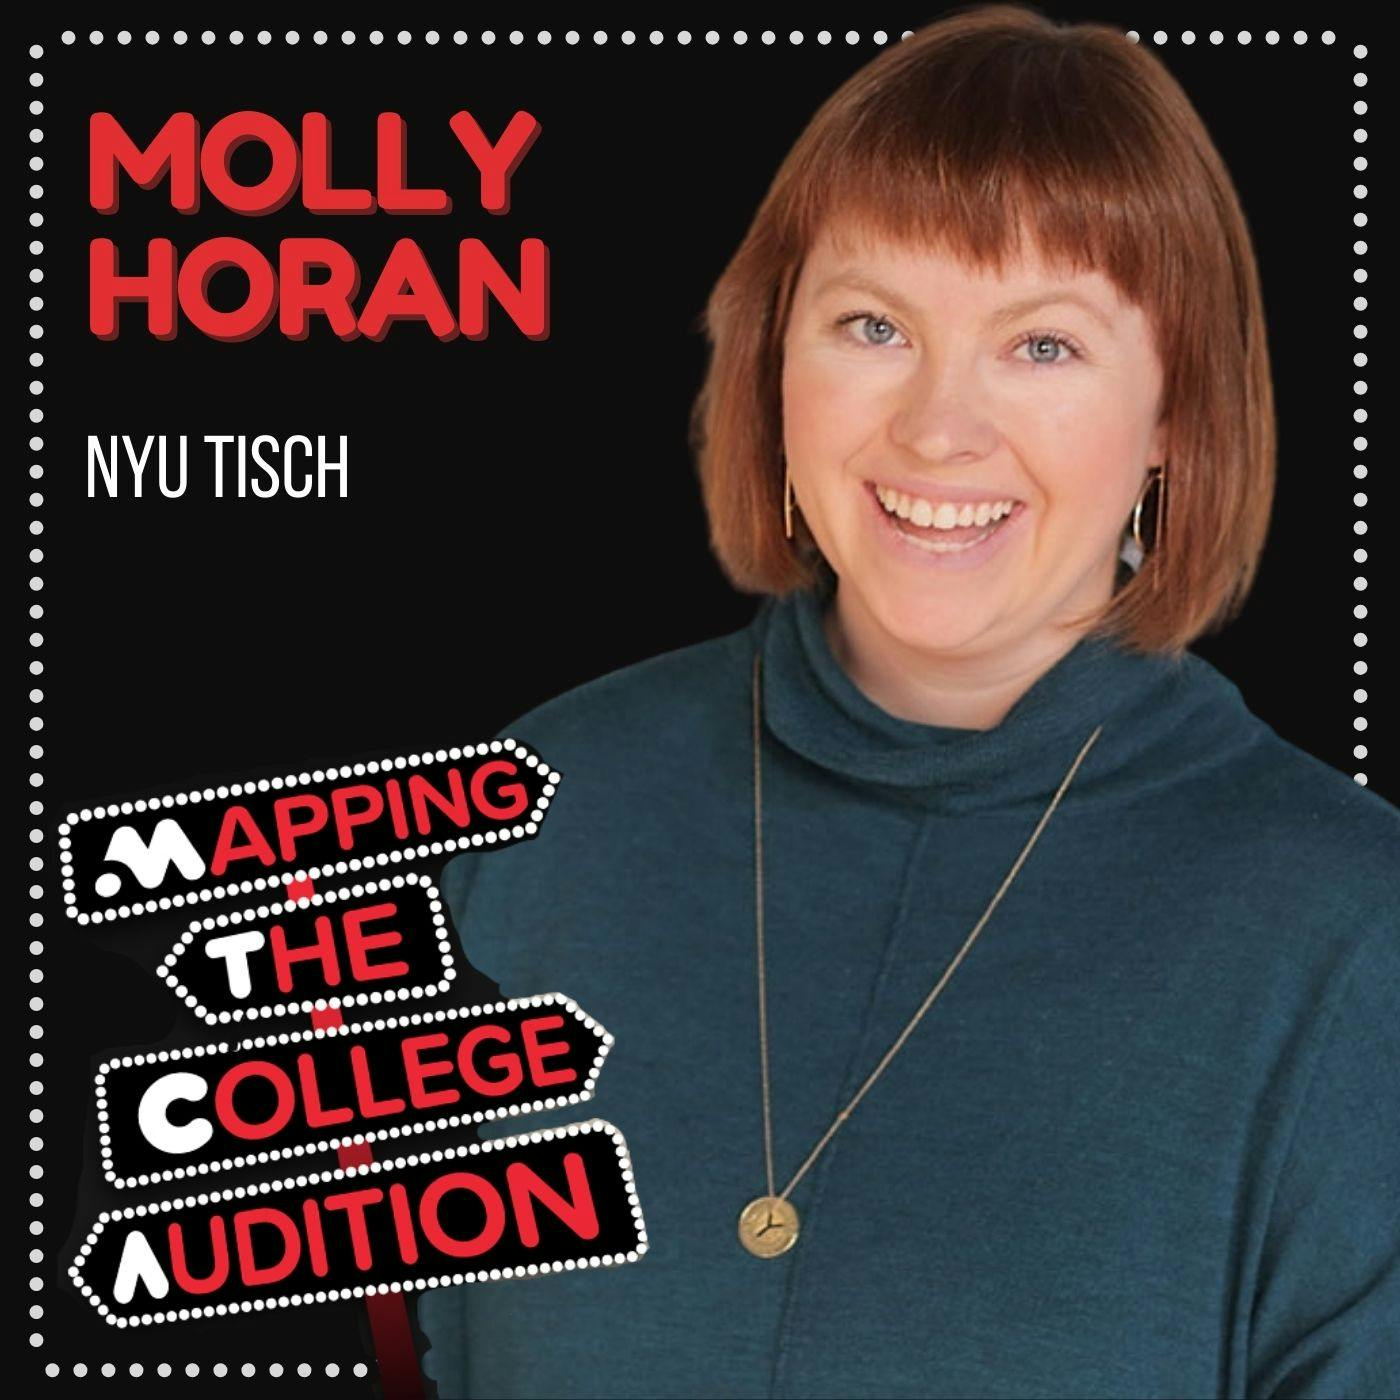 Ep. 57 (CDD): Molly Horan (NYU Tisch) on What Makes NYU Different